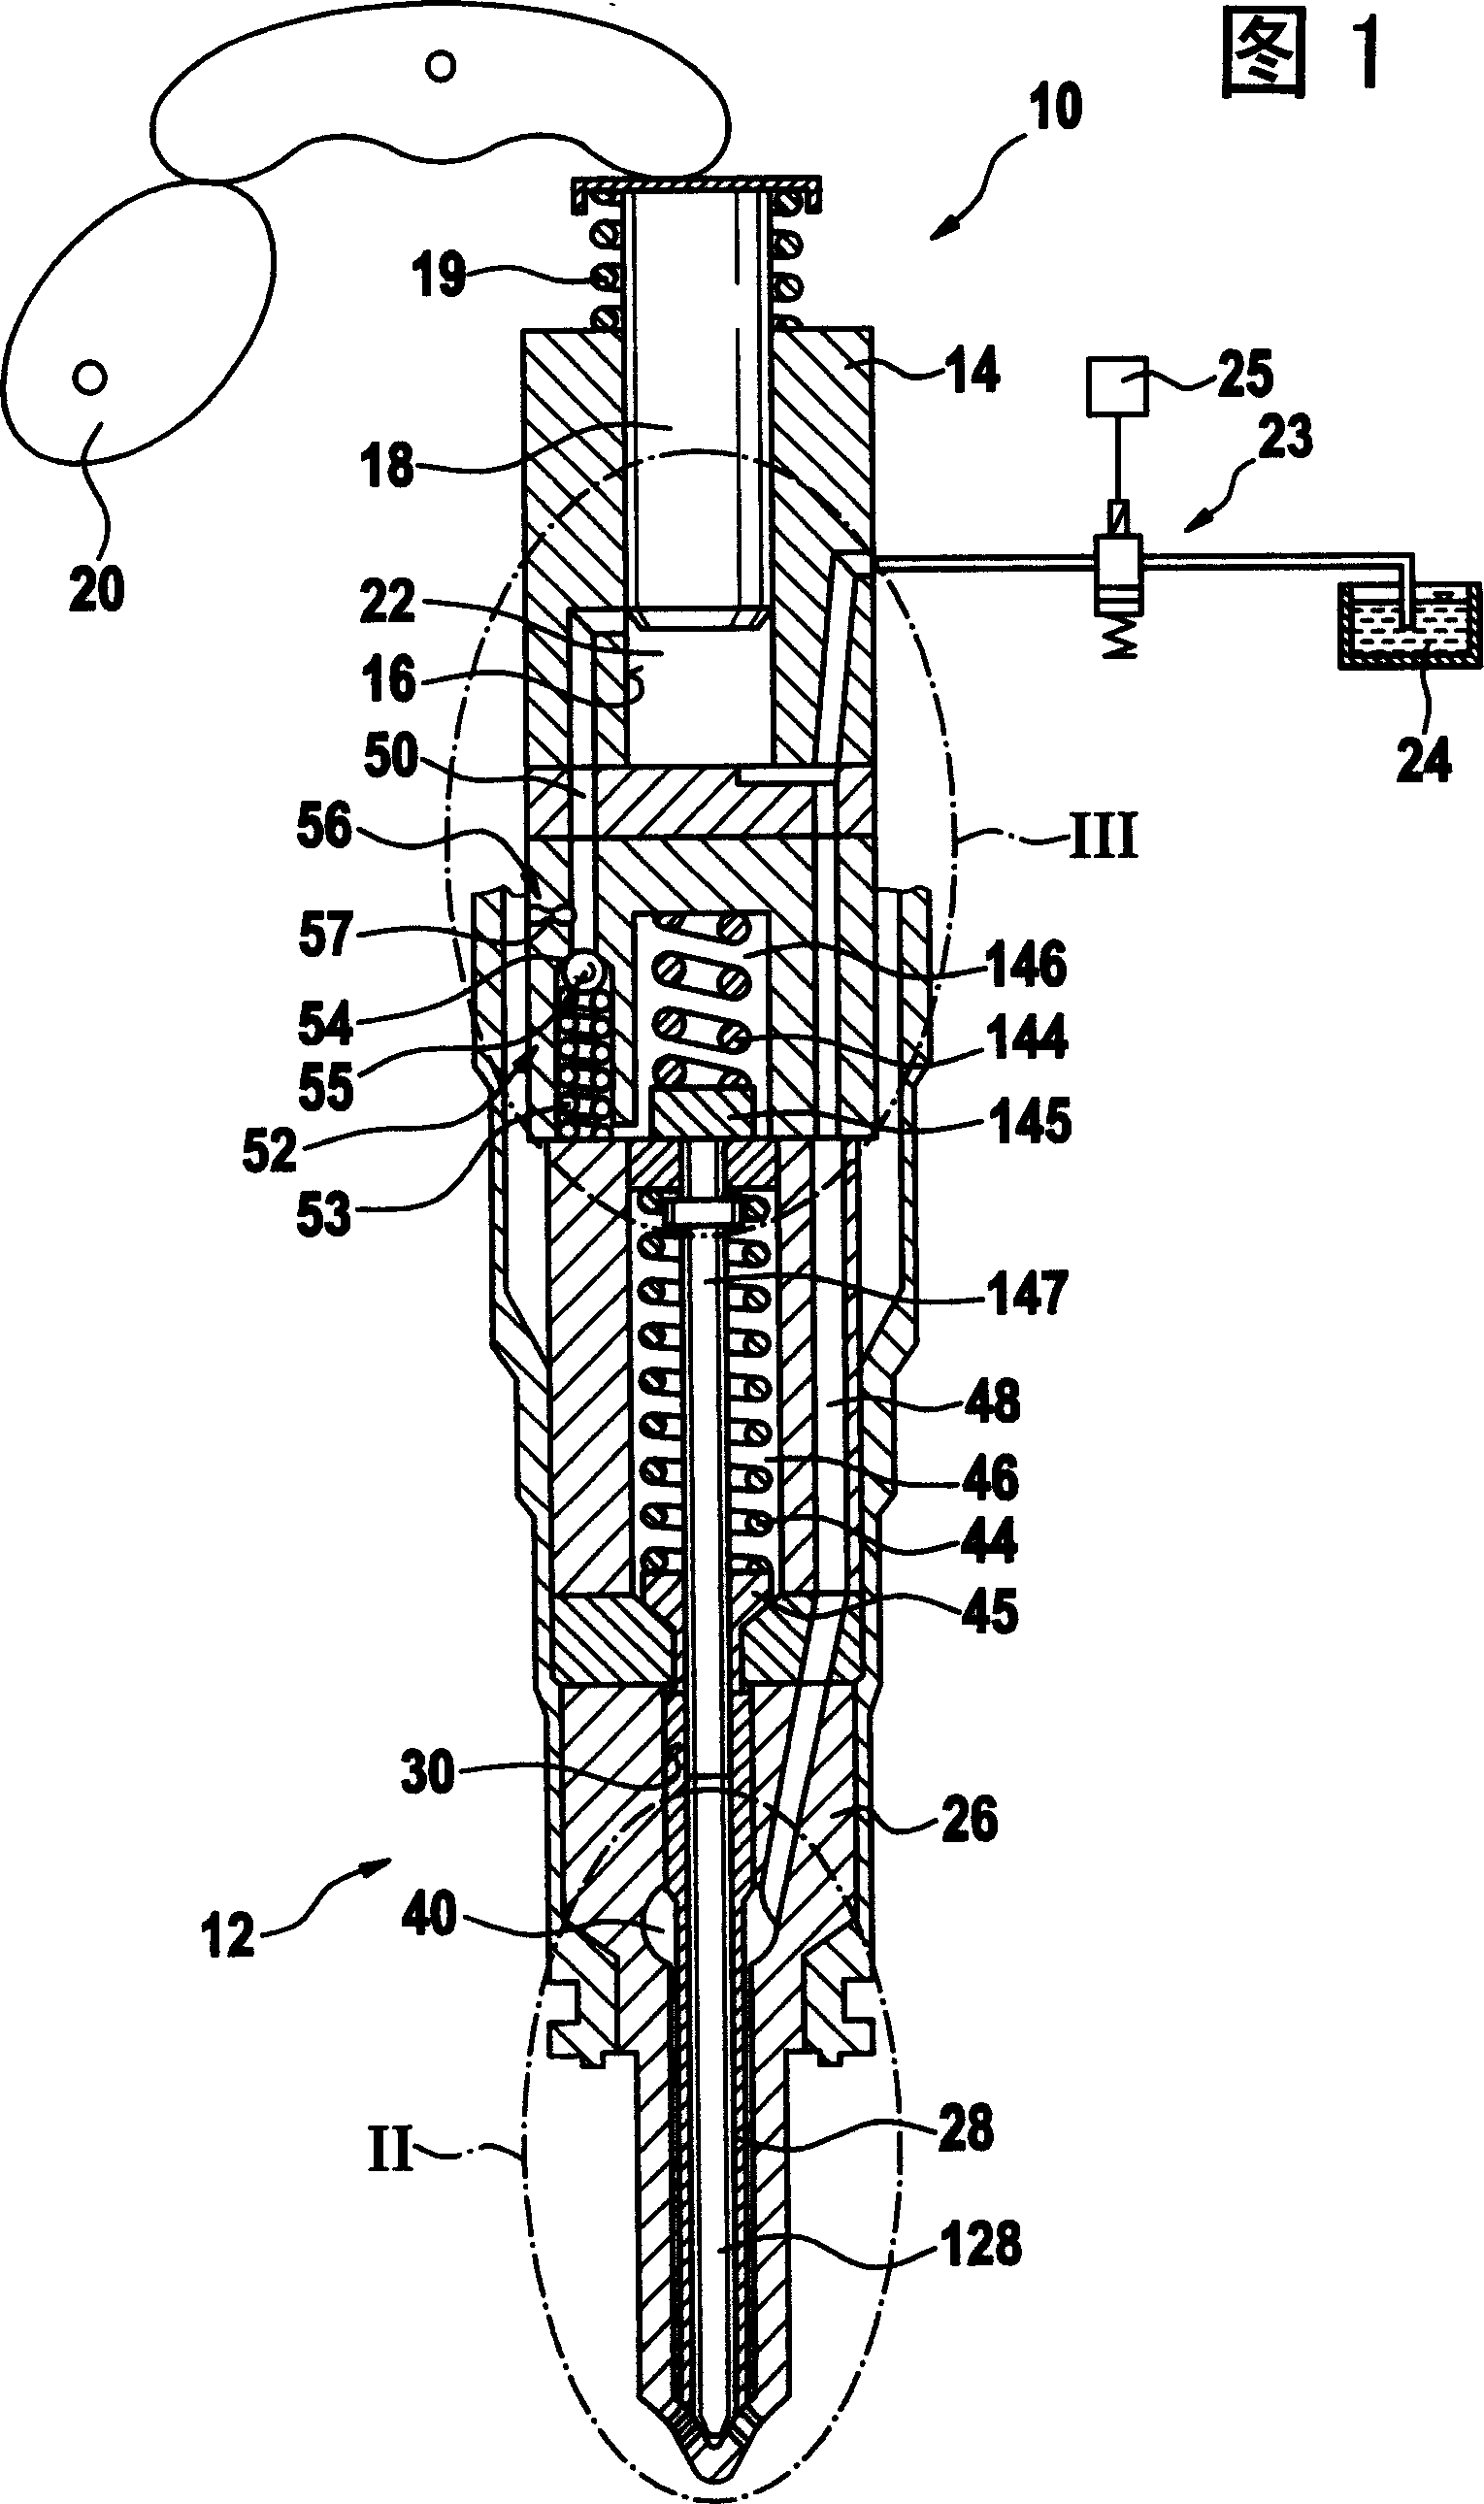 Fuel jetting device used in internal combustion engine